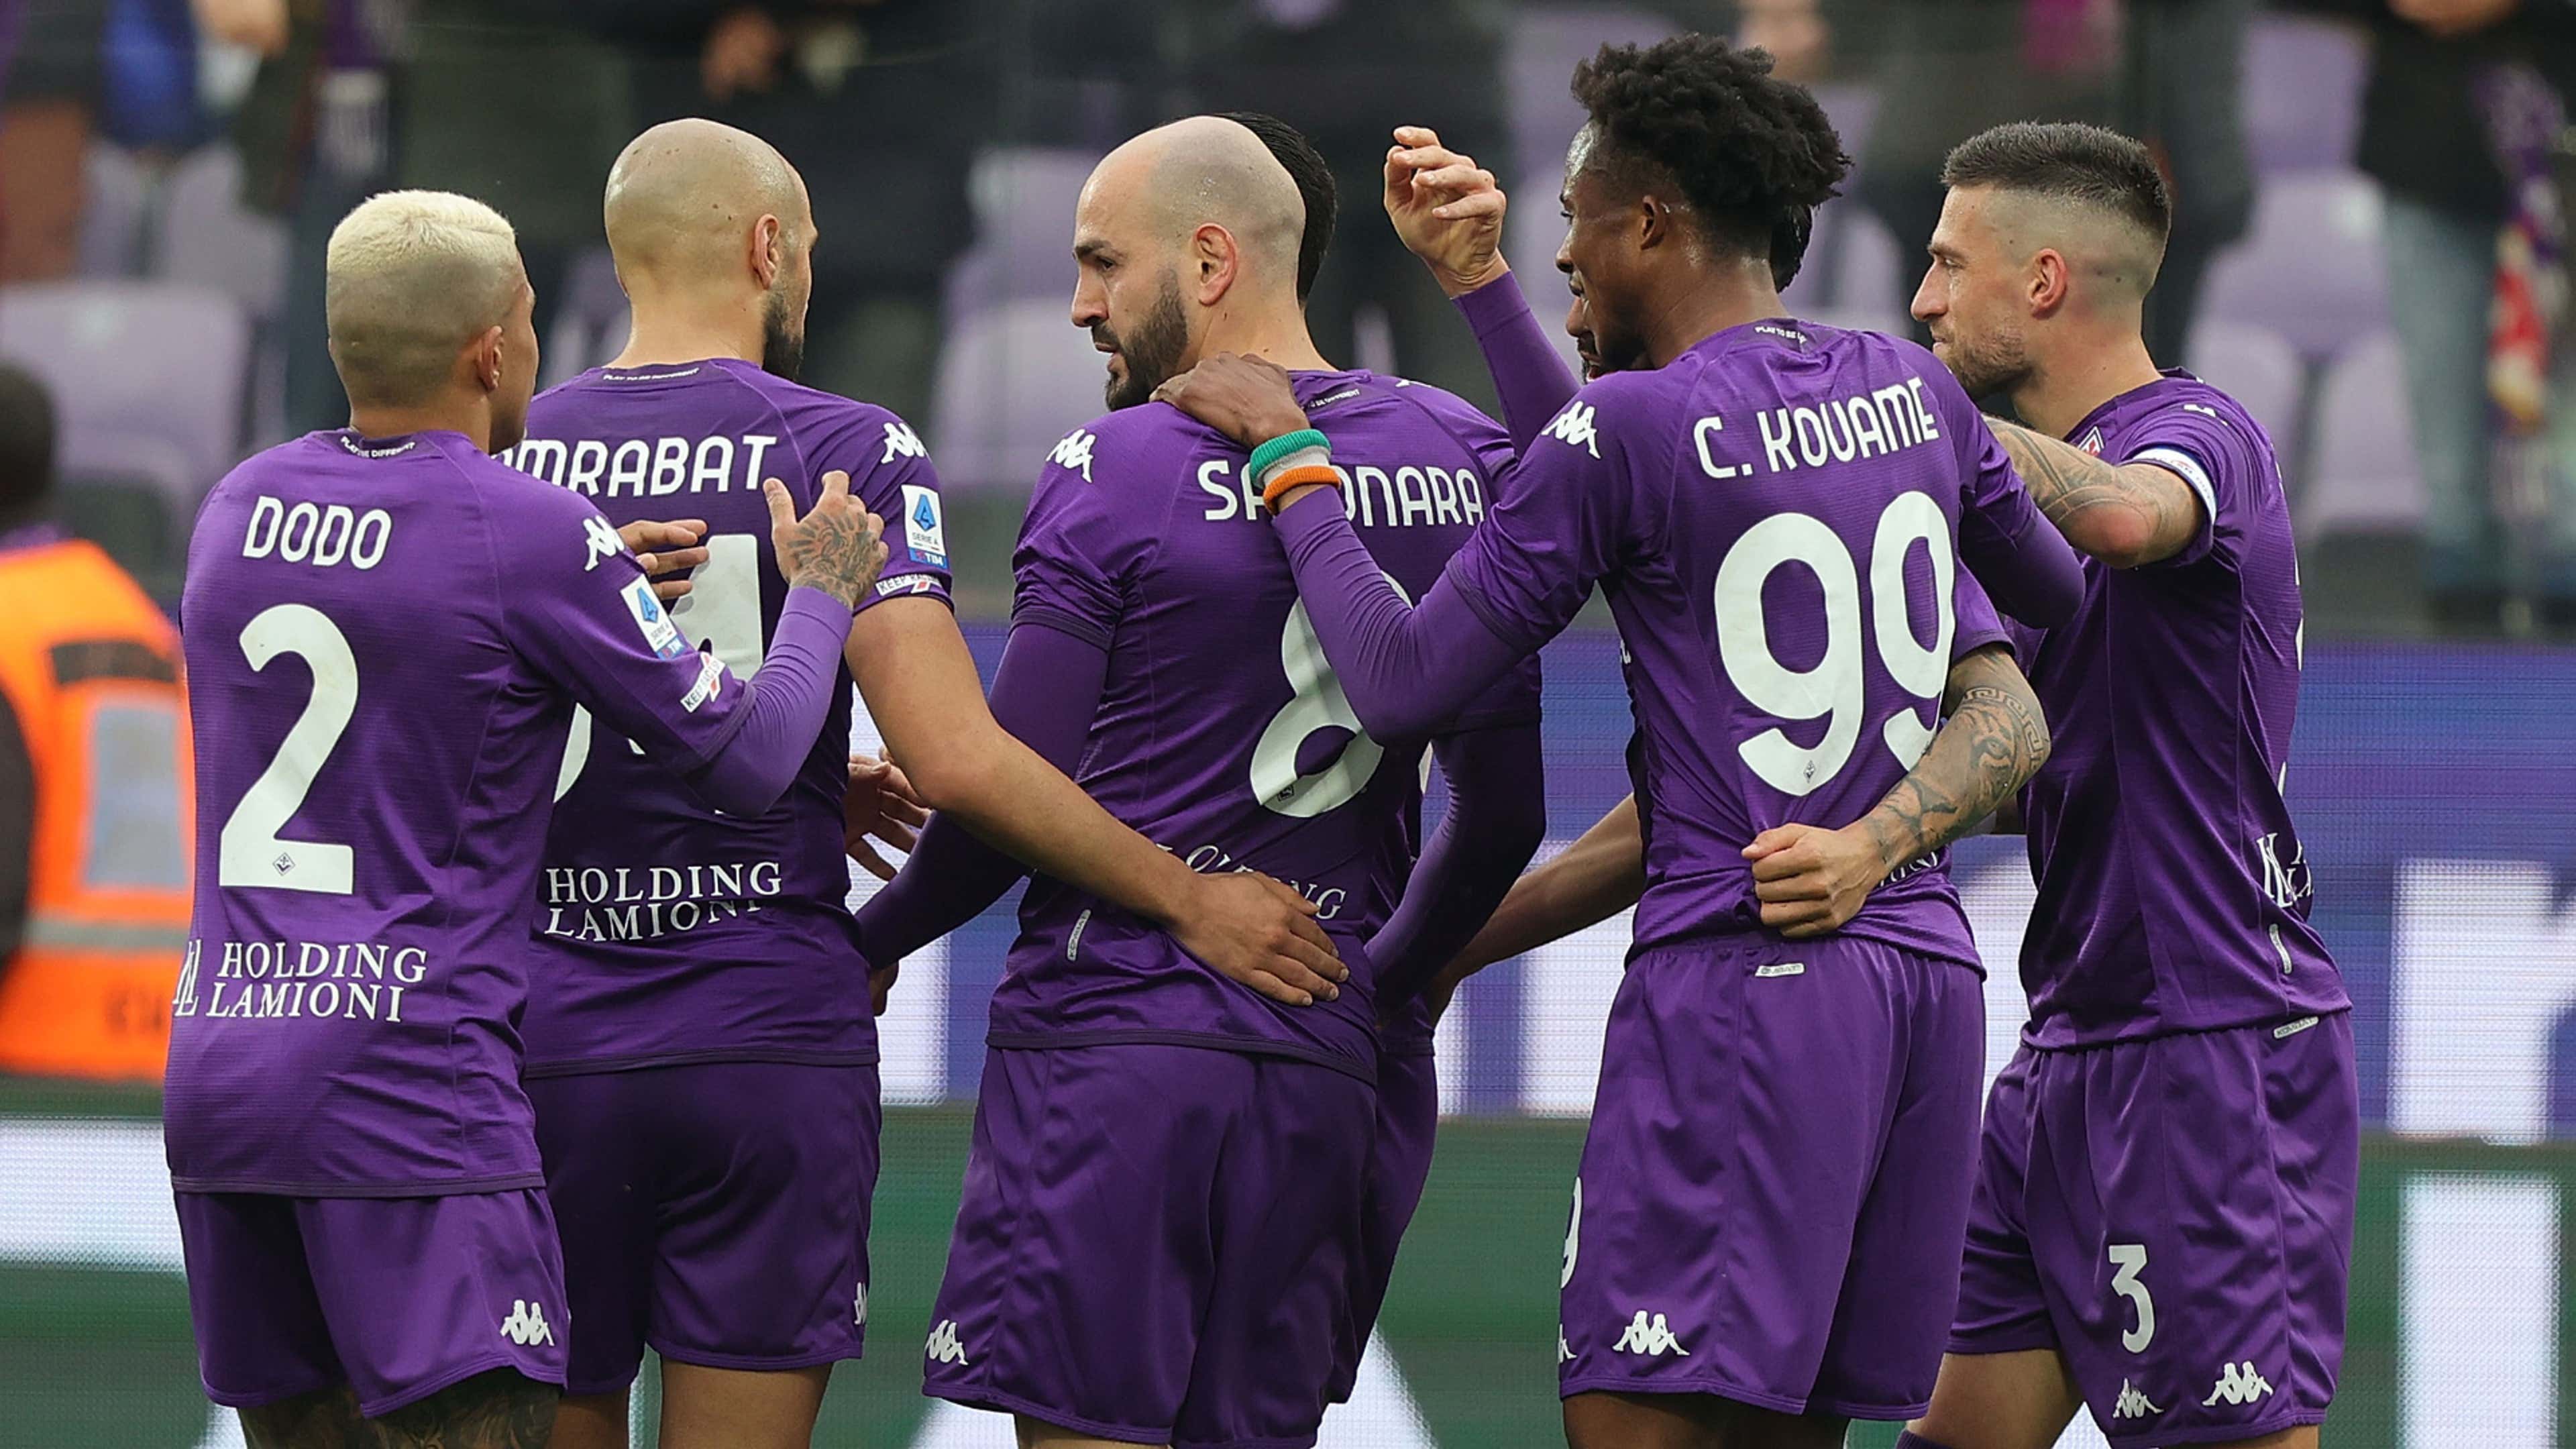 WATCH: Serie A match of the year contender as Inter's Mkhitaryan scores  stoppage time winner vs Fiorentina in seven-goal thriller